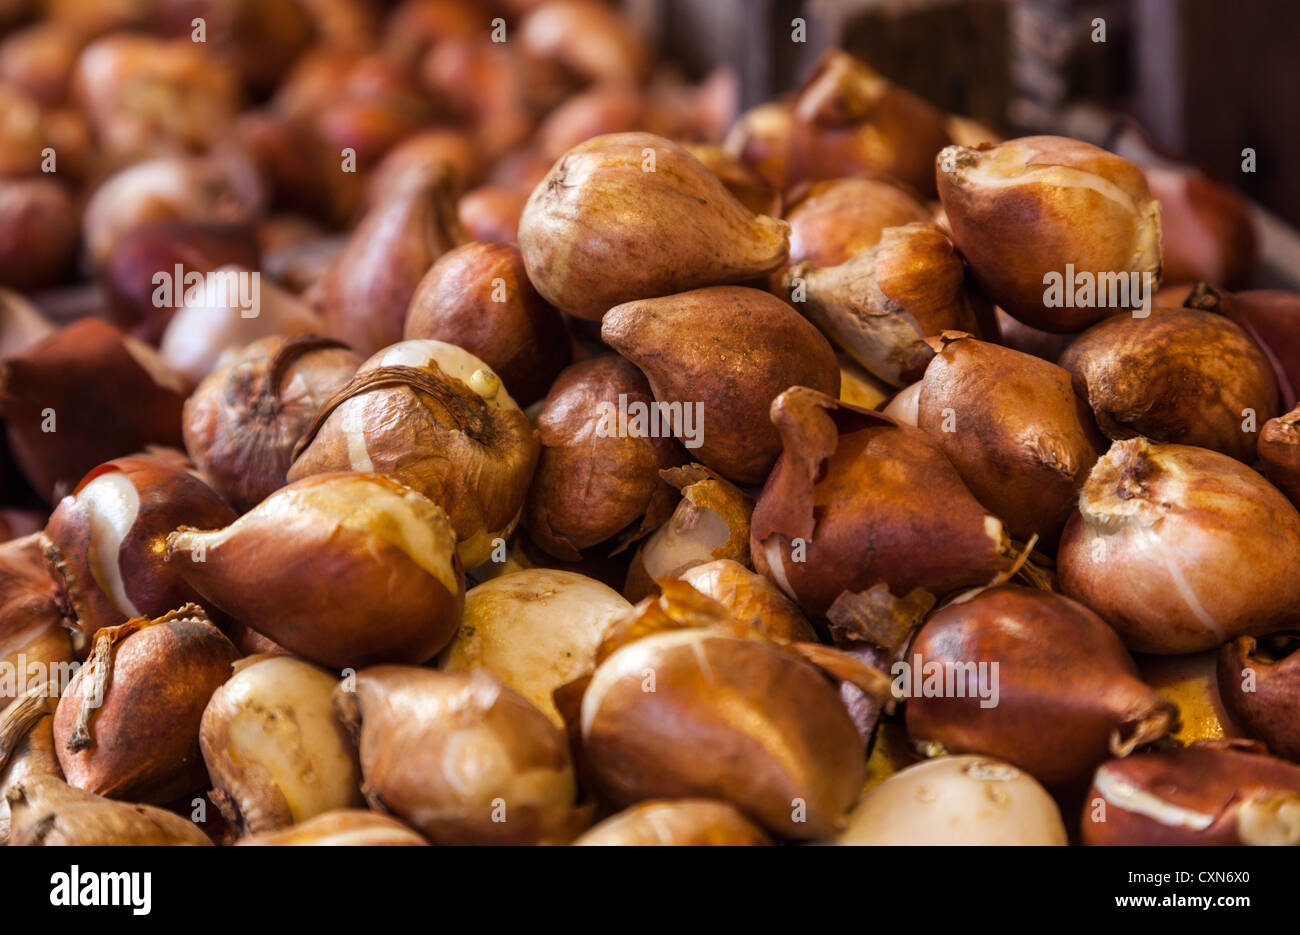 Close-up of a heap of tulip bulbs on a flower market stall. Stock Photo